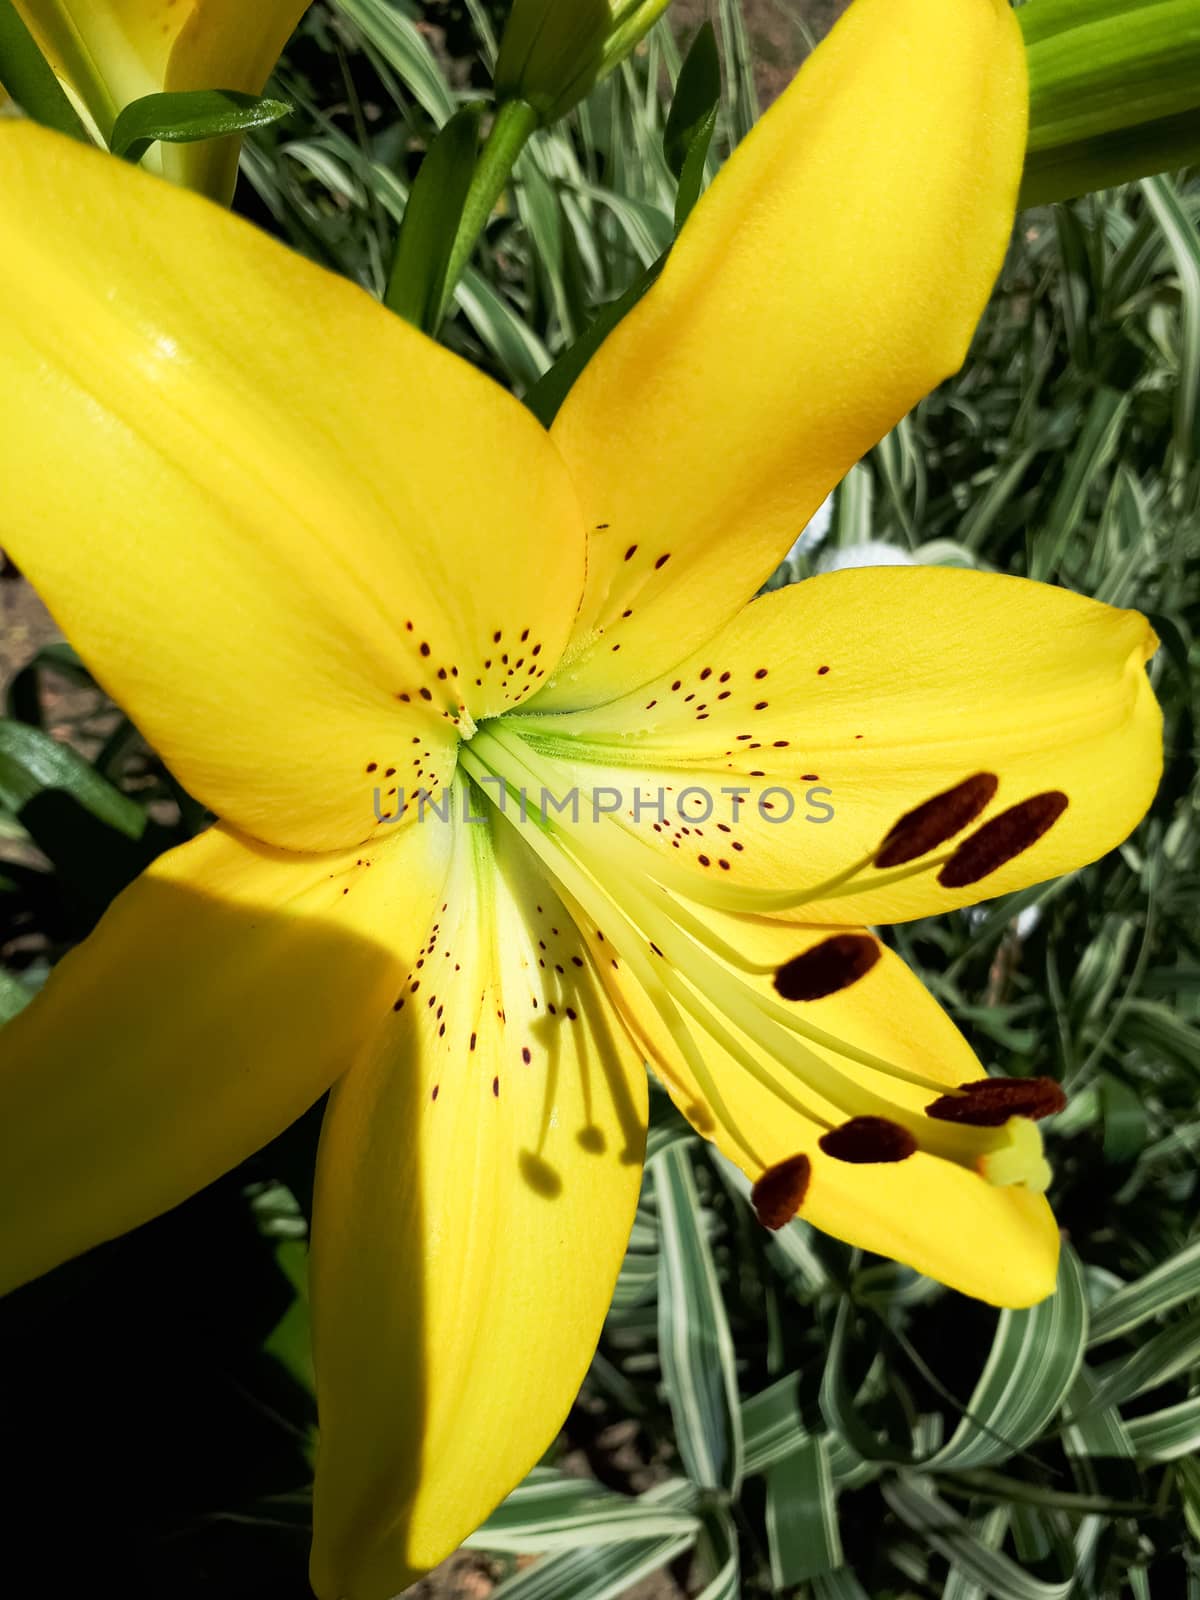 Flowers of yellow lilies on the flowerbed. lily blossoms.